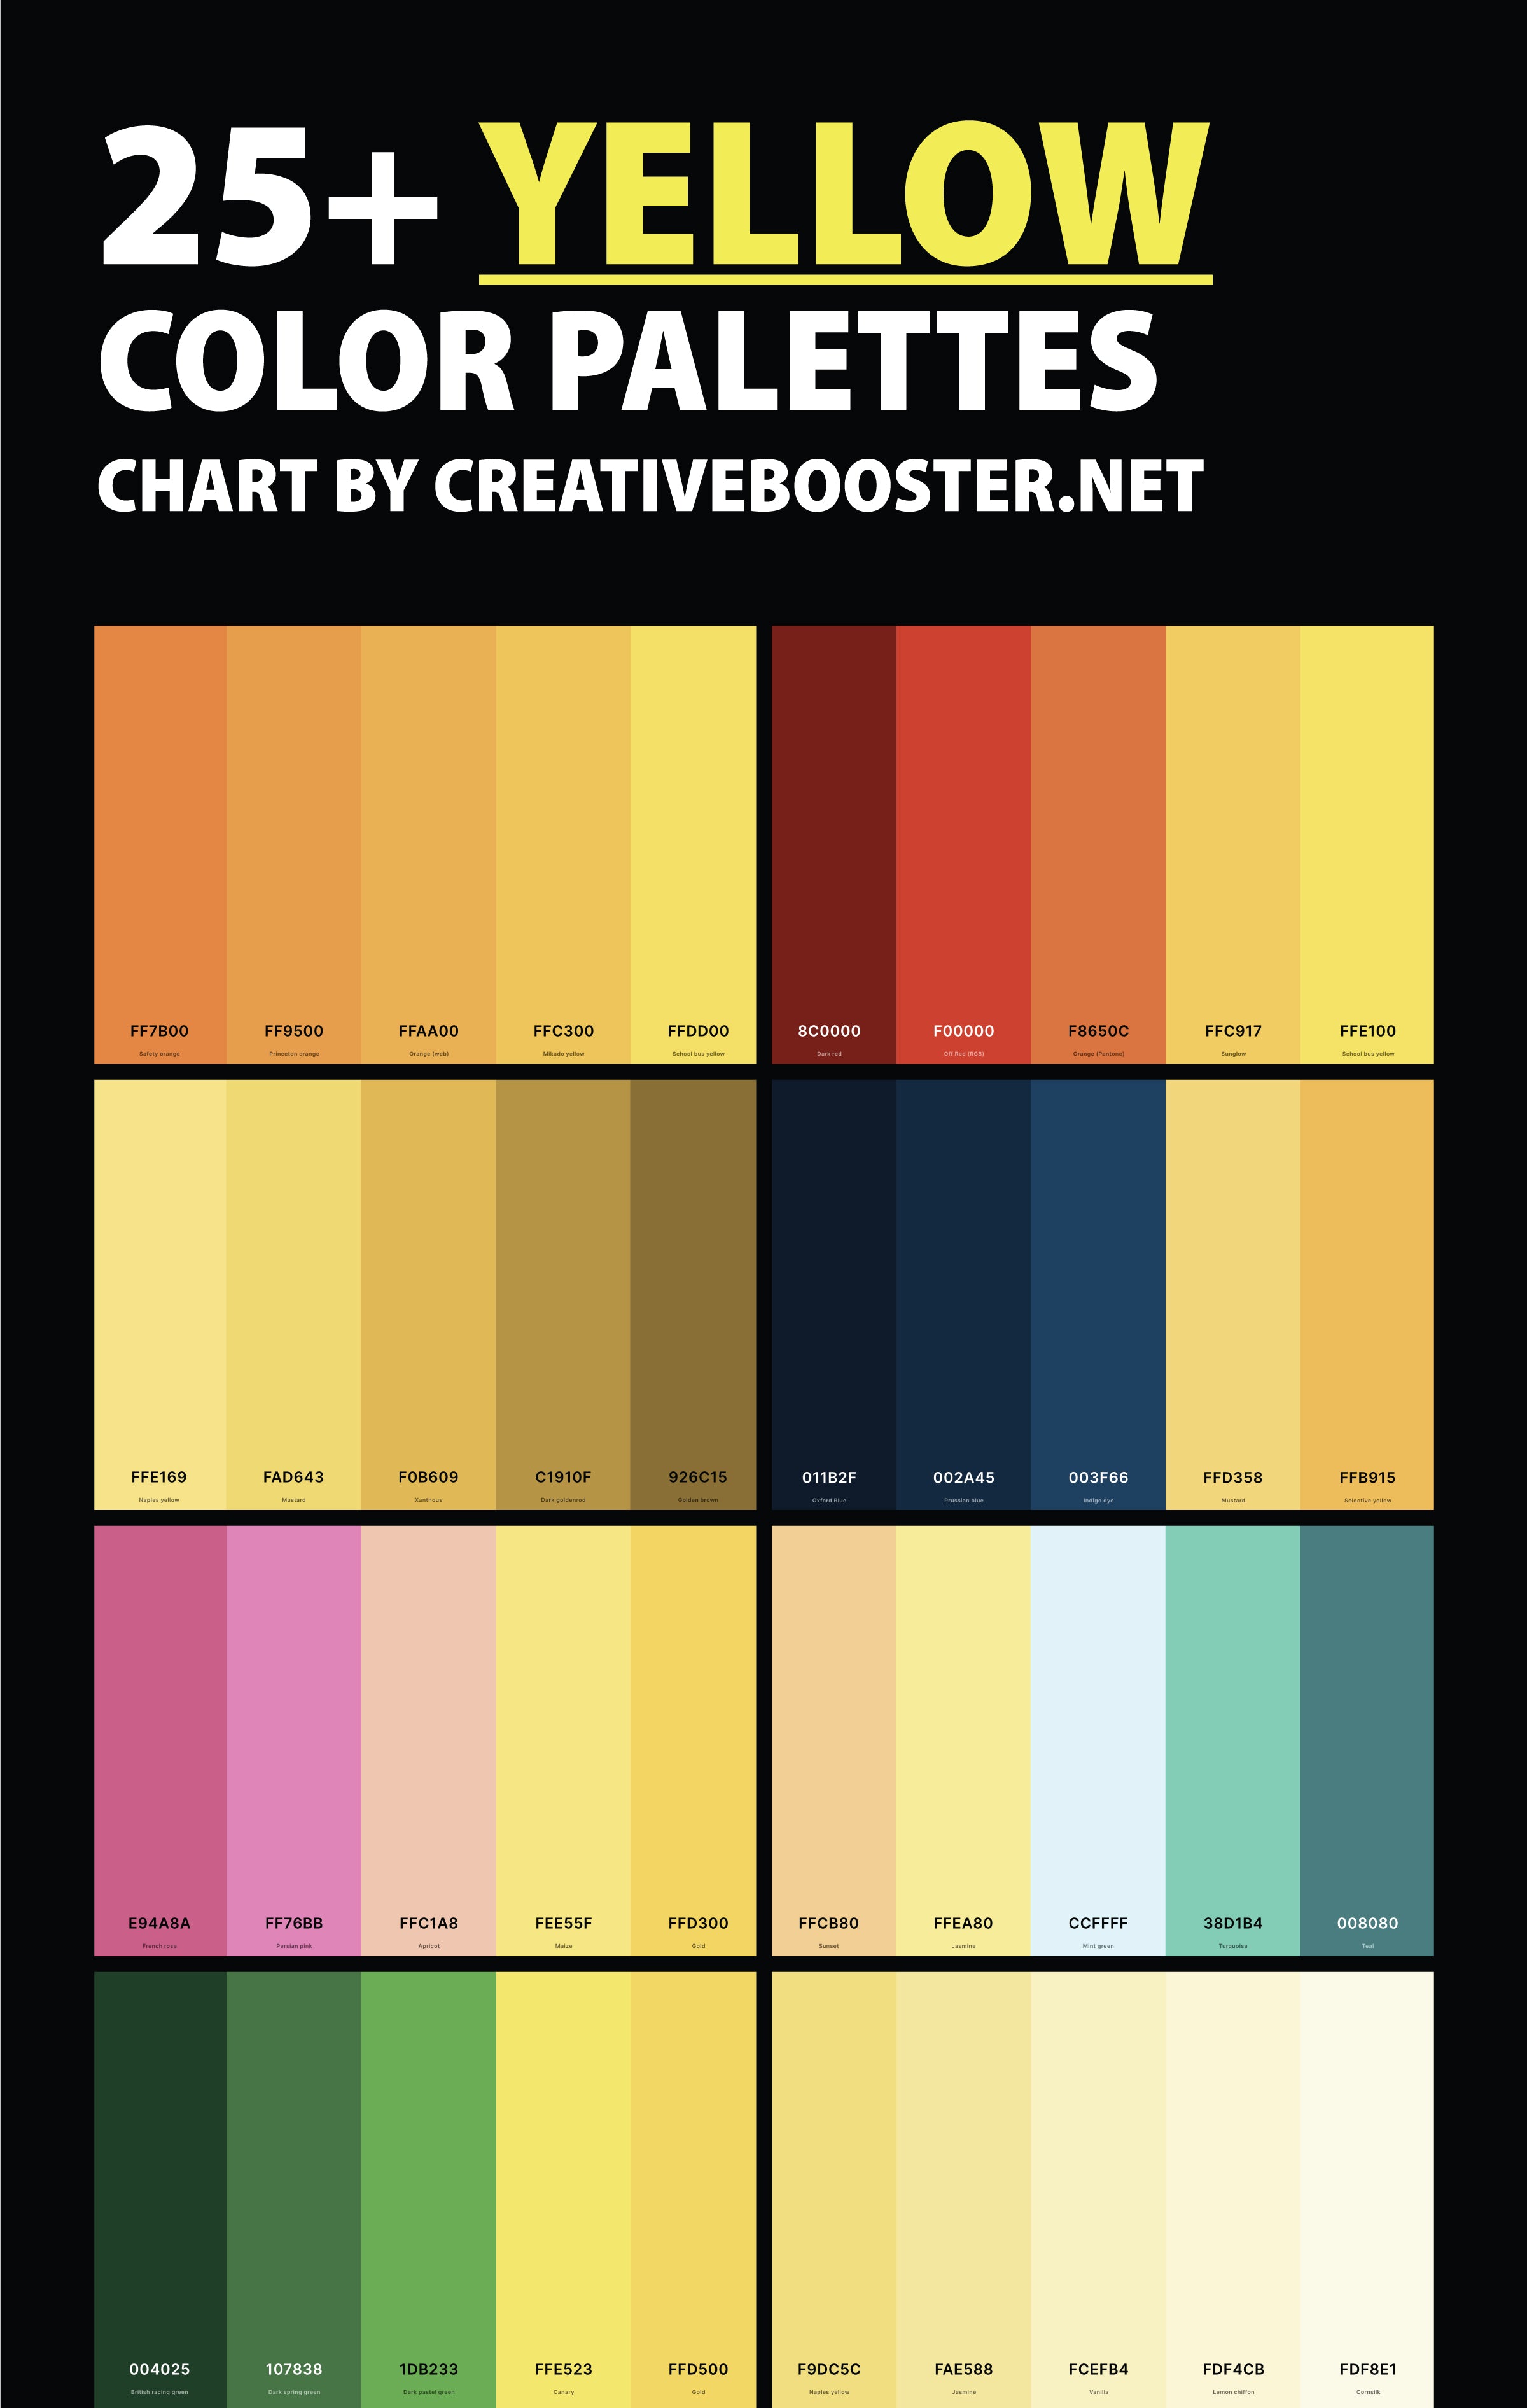 yellow-color-palettes-chart-with-names-and-hex-codes-pinterest